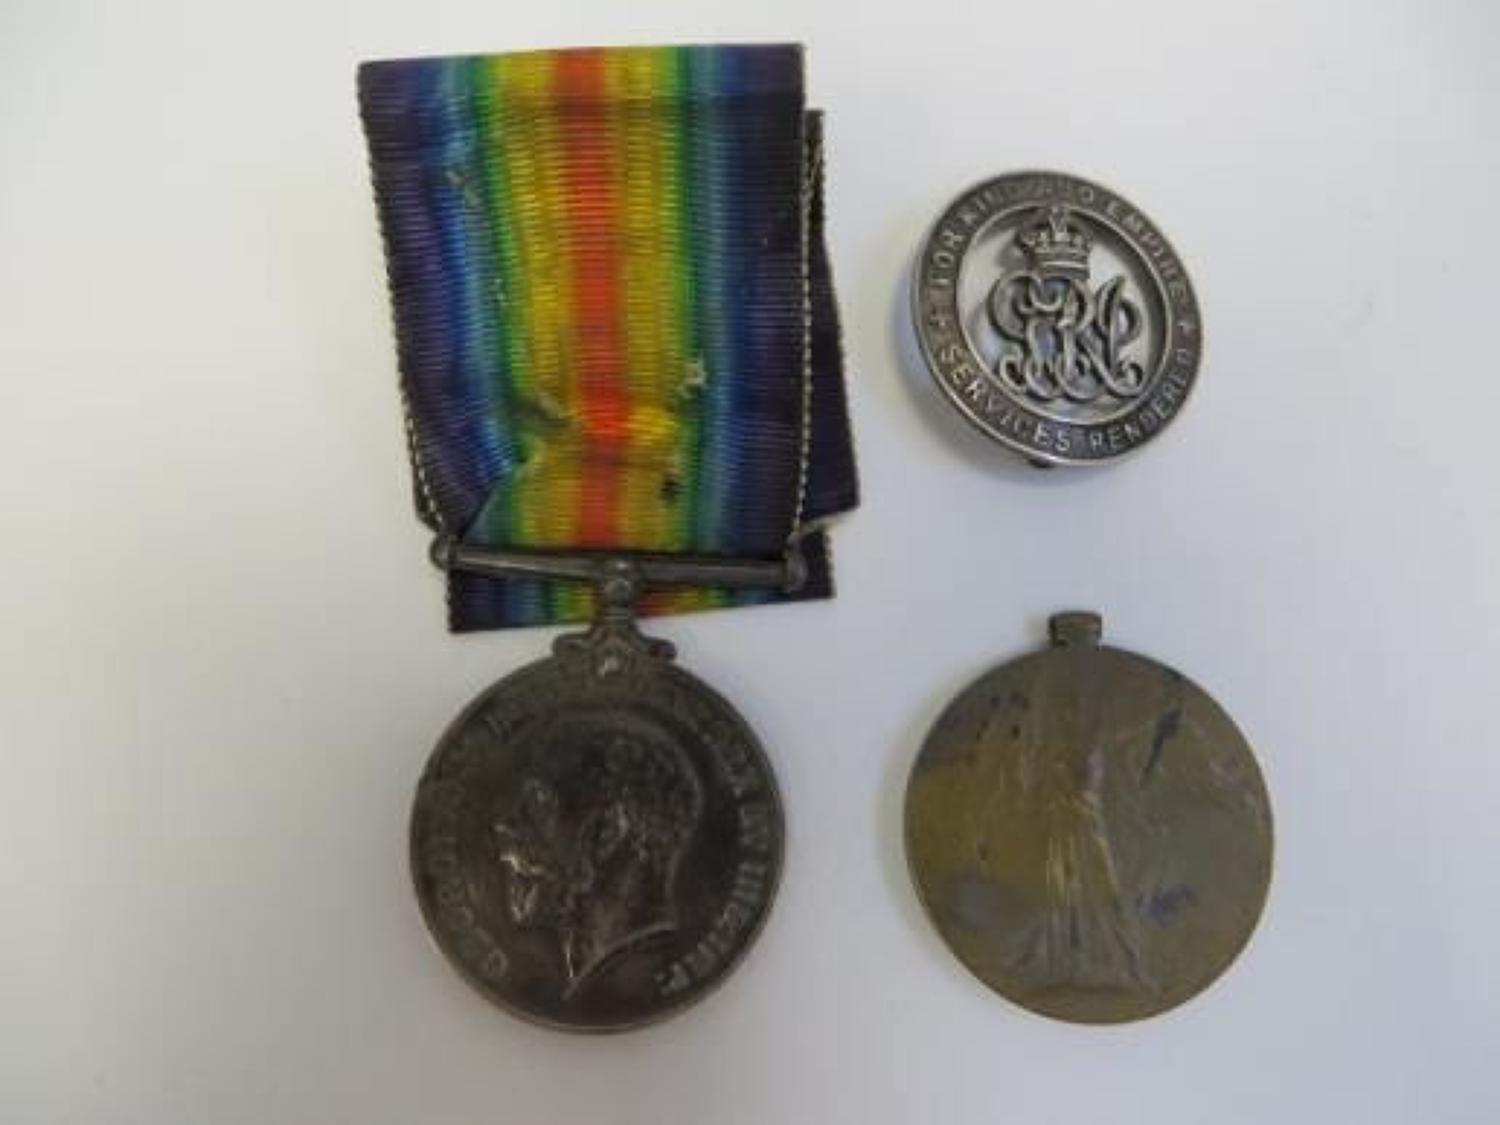 WW 1 Middlesex Regiment Medal Pair and Services Rendered Badge